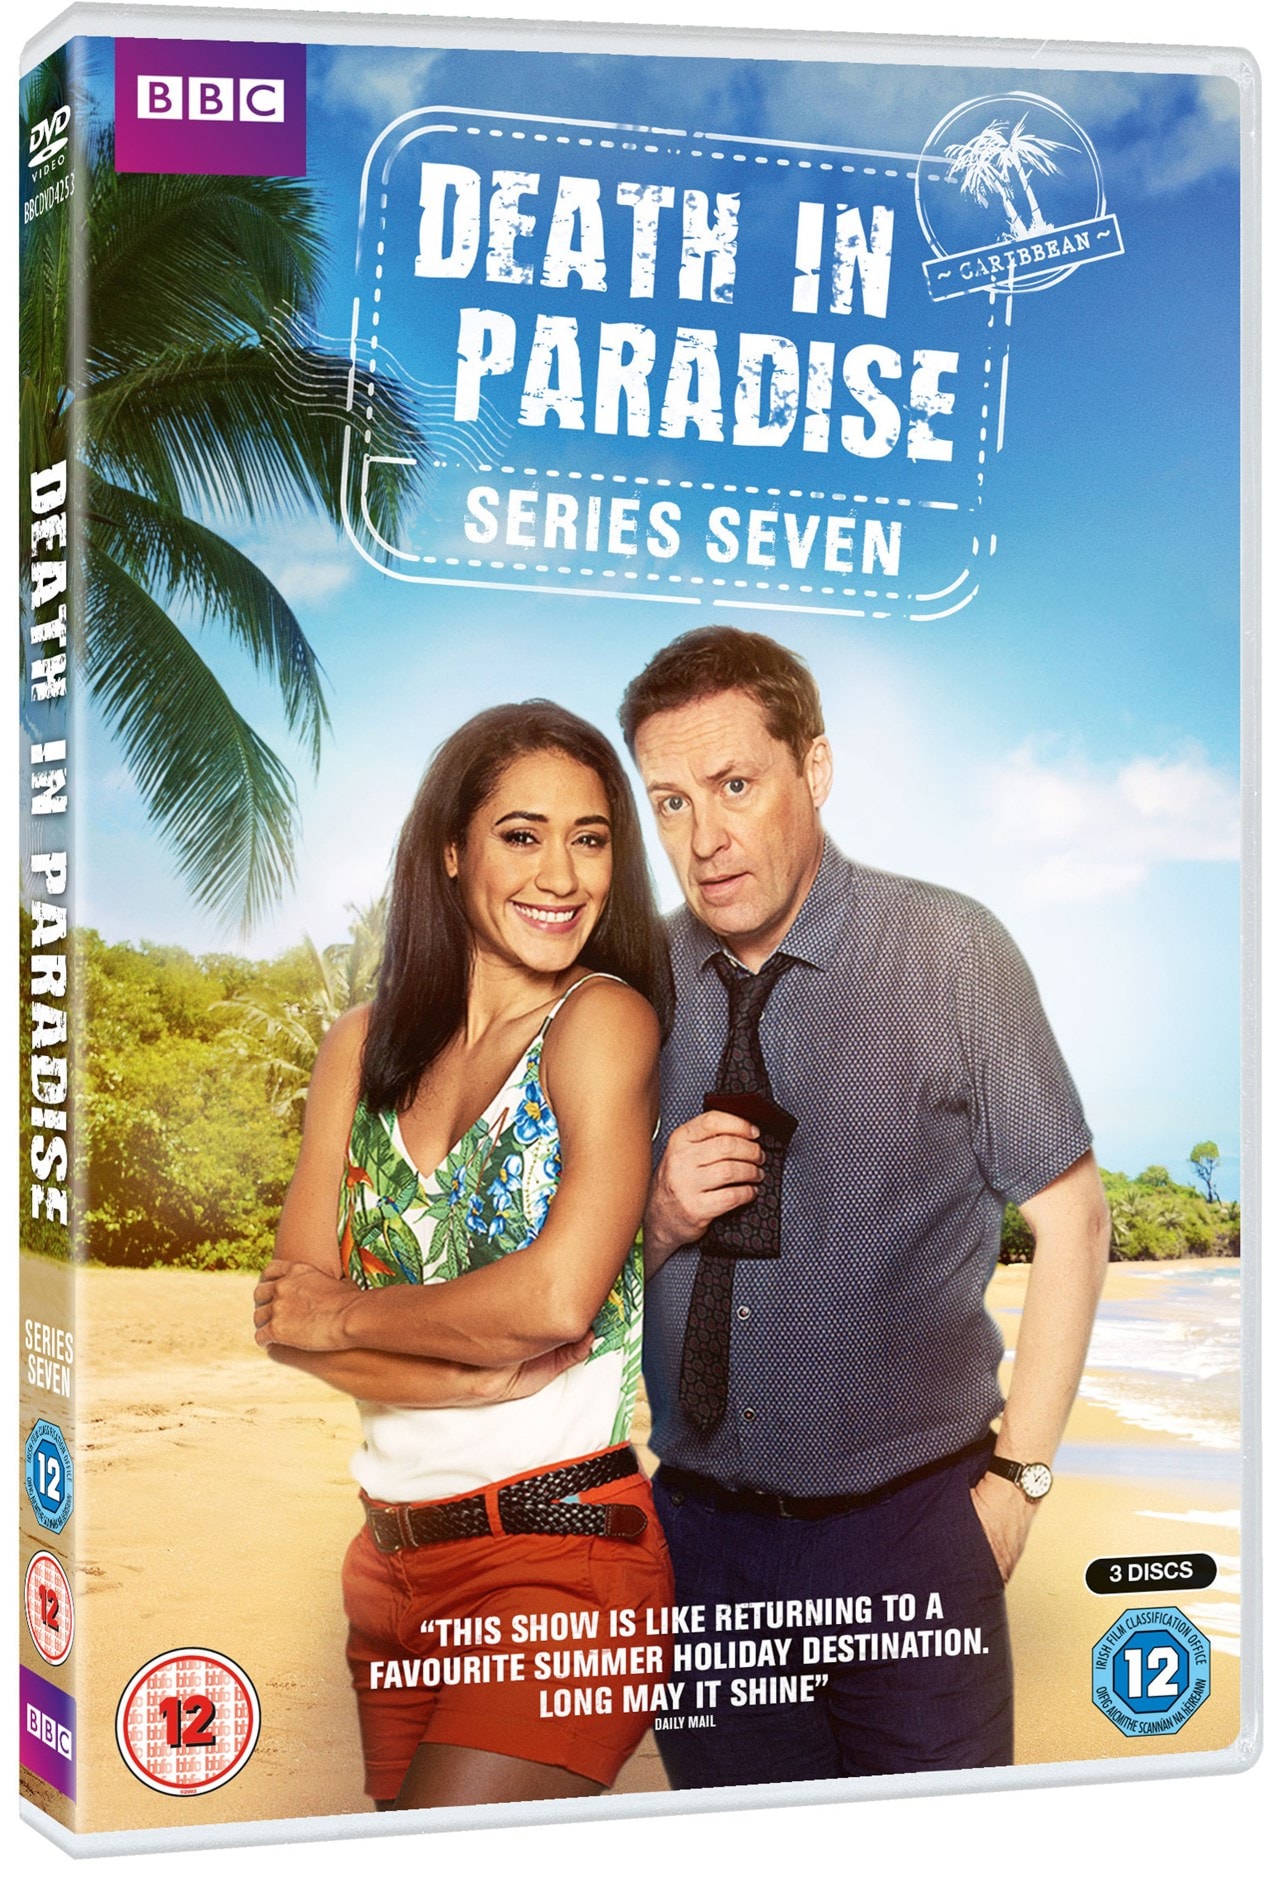 Series 7 отзывы. Death in Paradise. The Paradise Series.